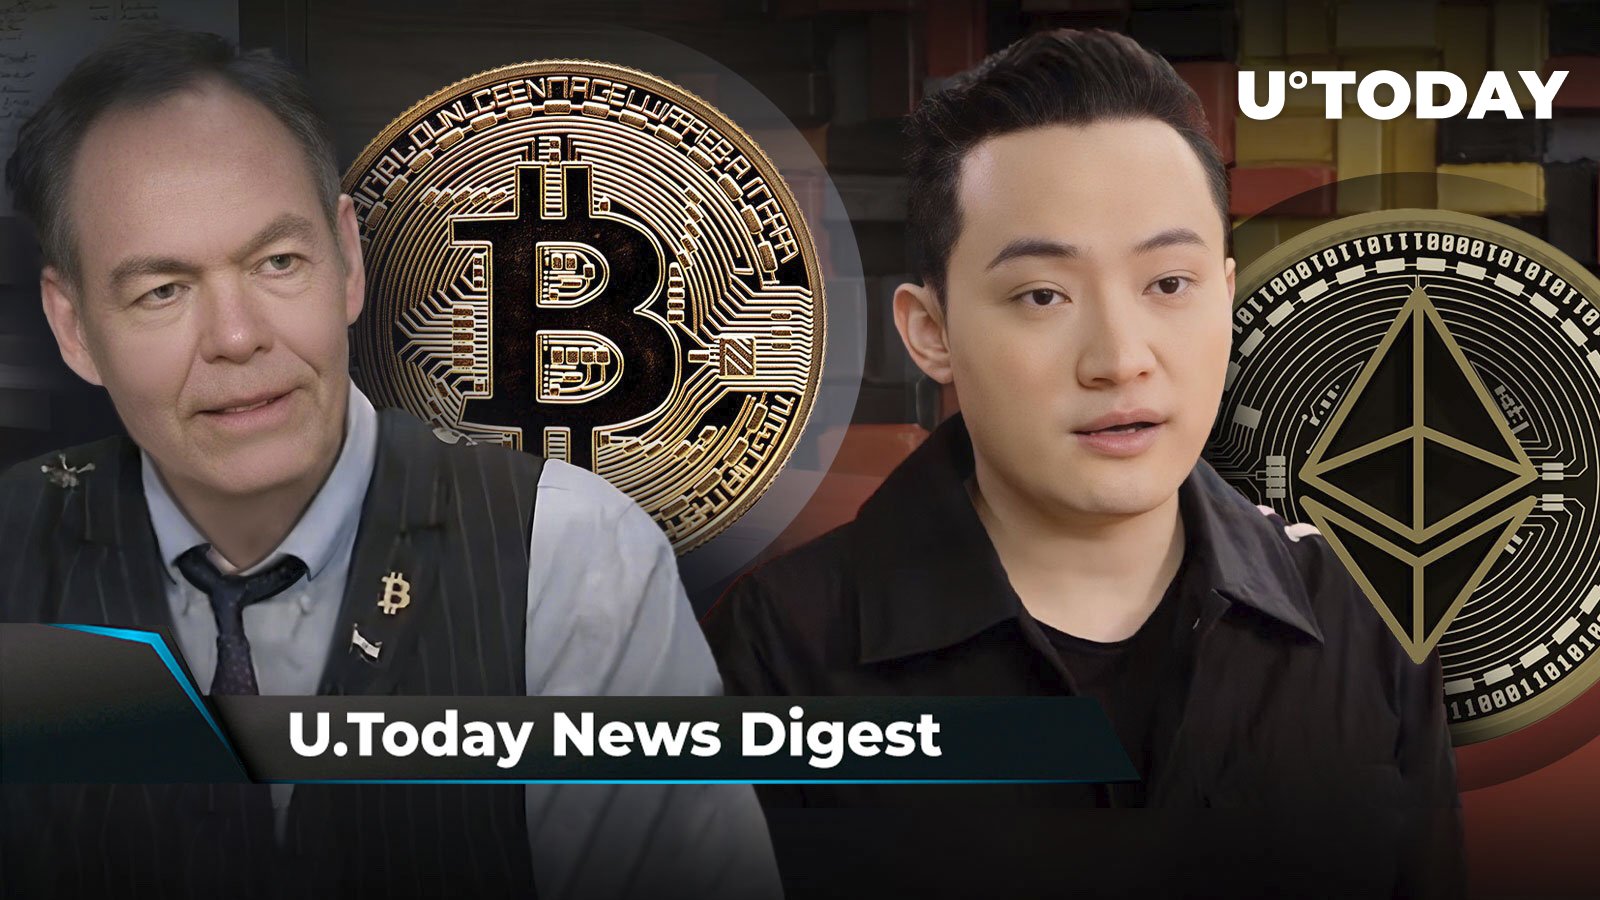 Max Keiser Points to BTC Price Growth Estimate, Justin Sun Withdraws .8 Million ETH From Binance, Elon Musk’s Post Sparks SHIB, XRP Armies’ Curiosity: Crypto News Digest by U.Today